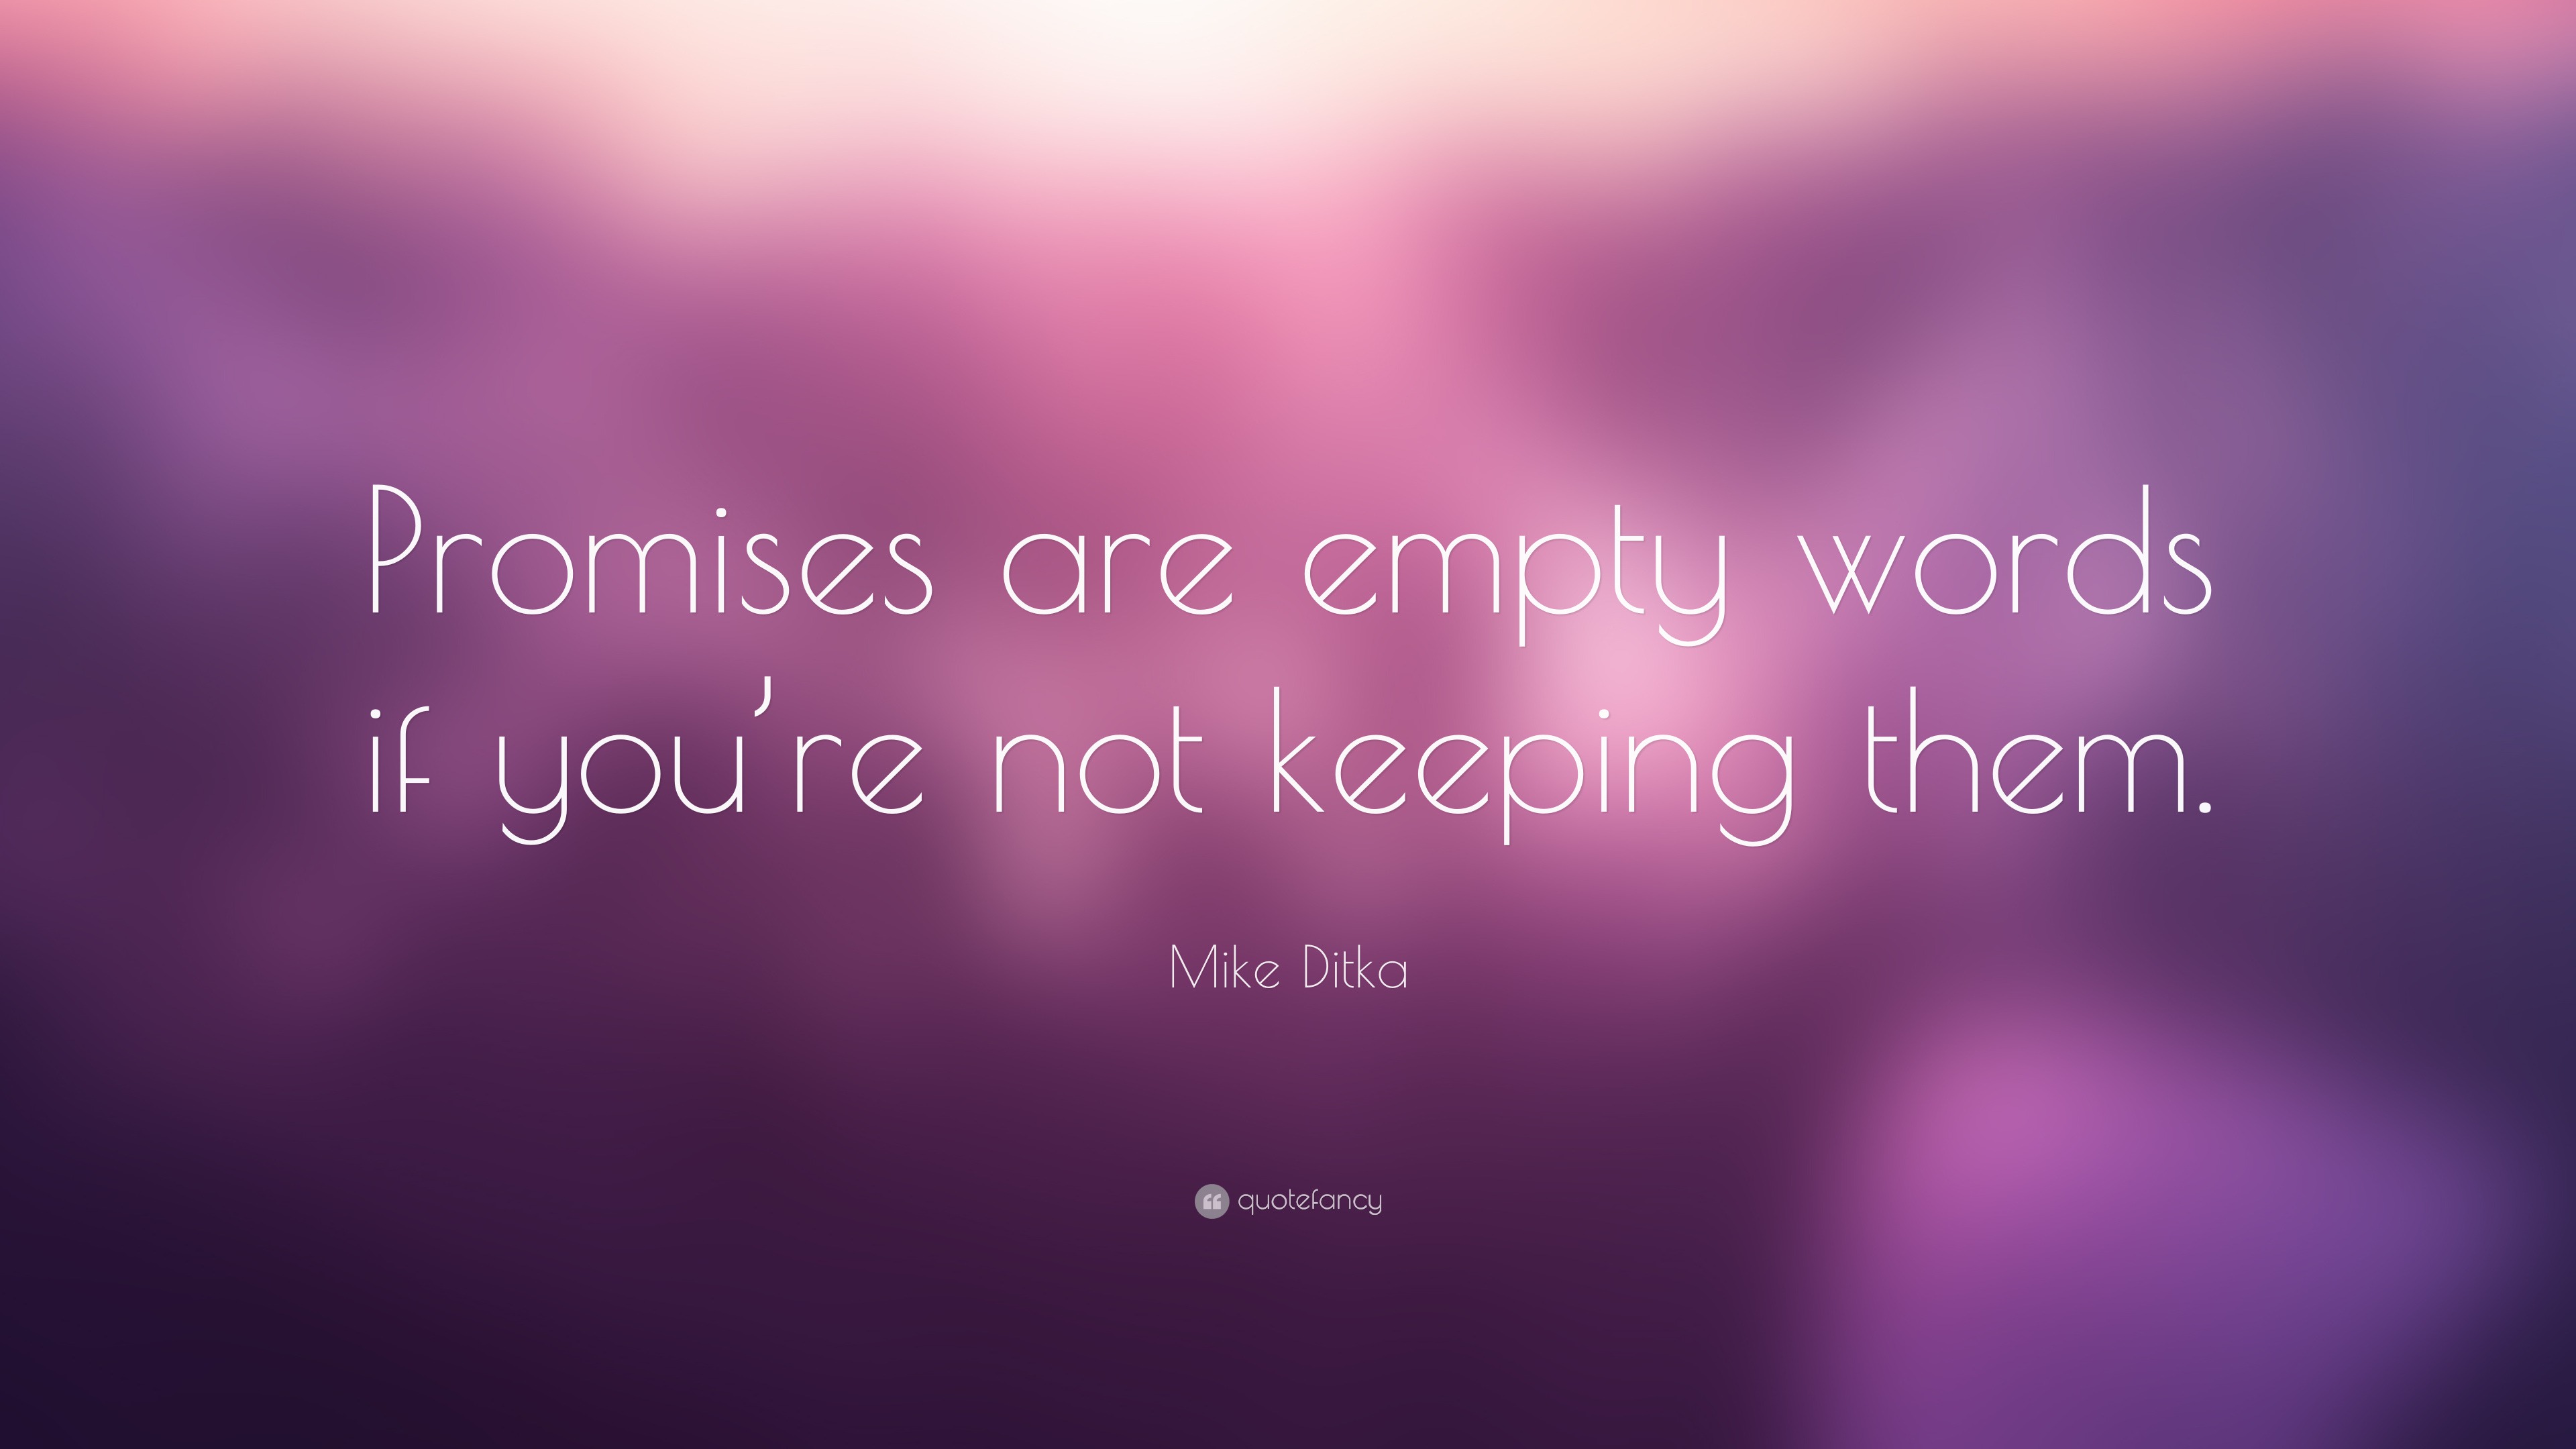 Mike Ditka Quote: "Promises are empty words if you're not ...